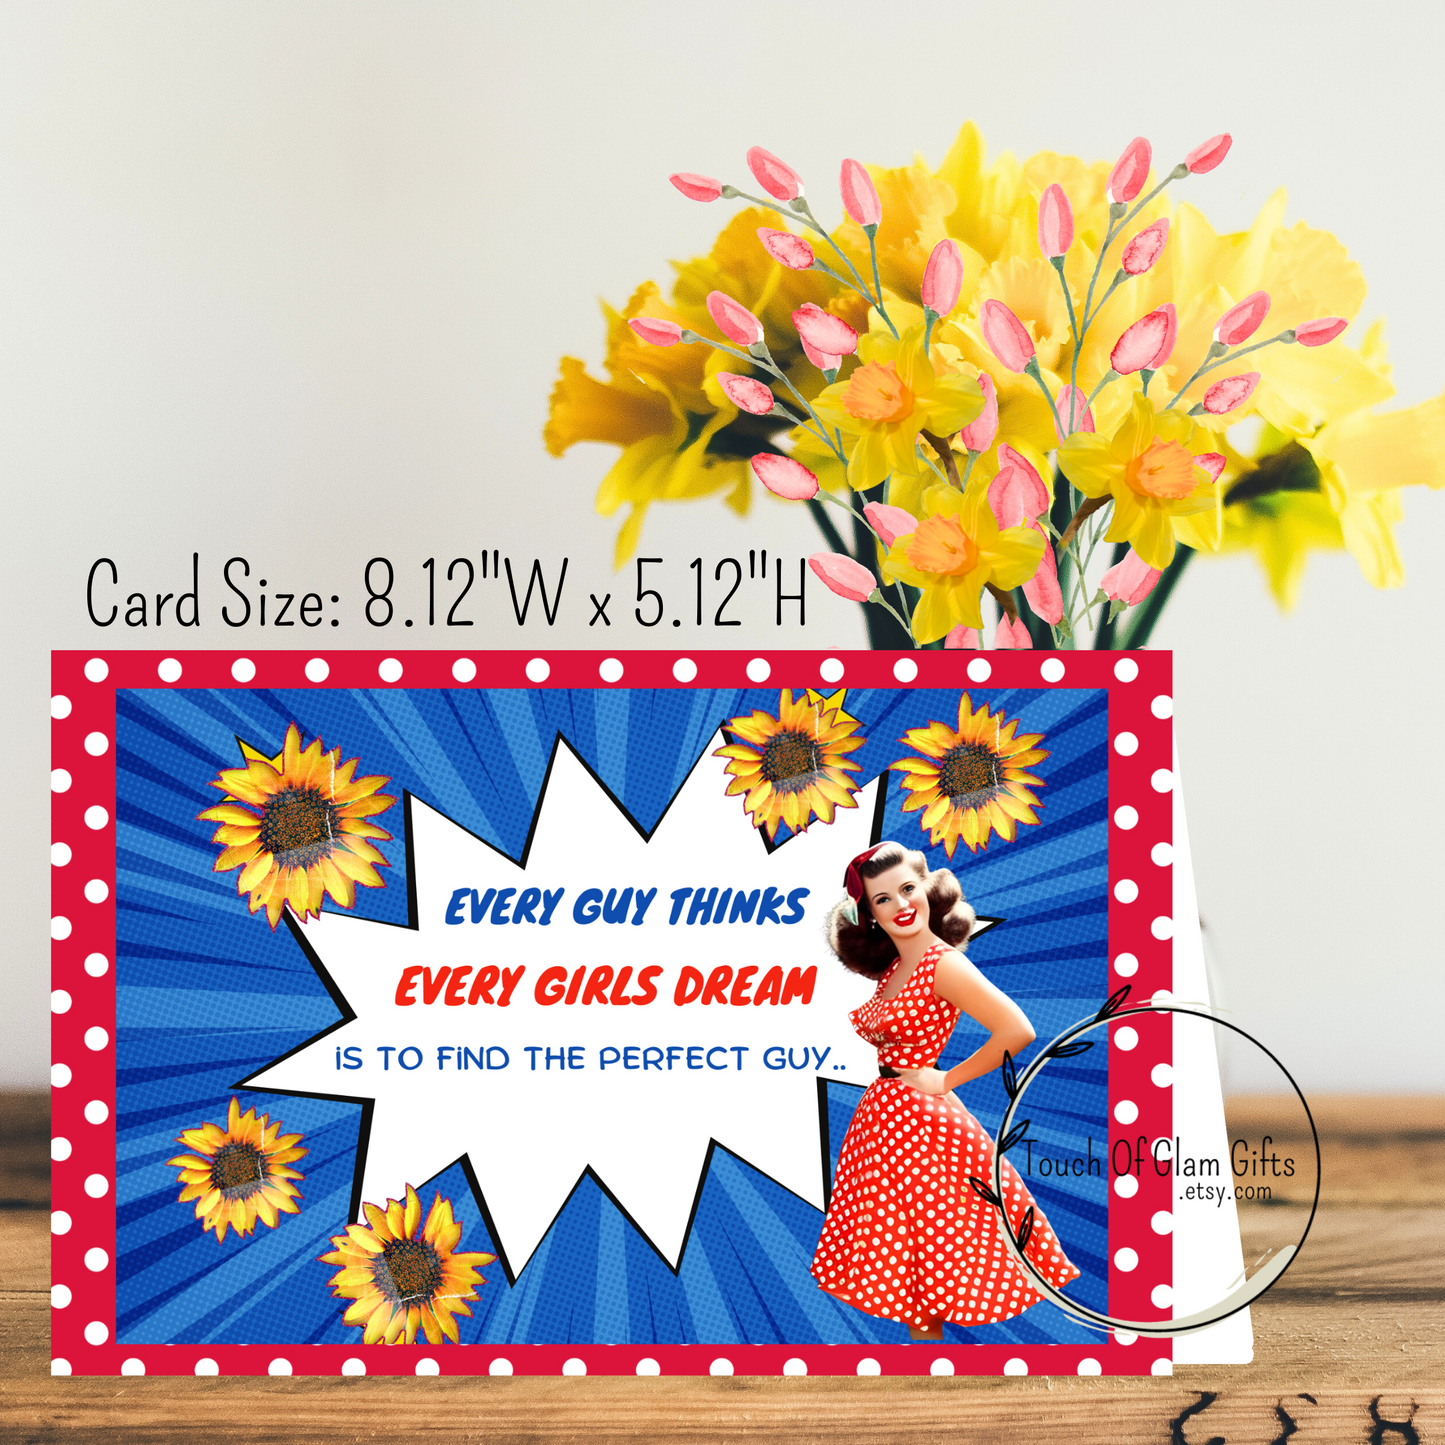 OUr large digital download birthday card for her shows the size eight point  twelve inch width by five point twelve inch height.